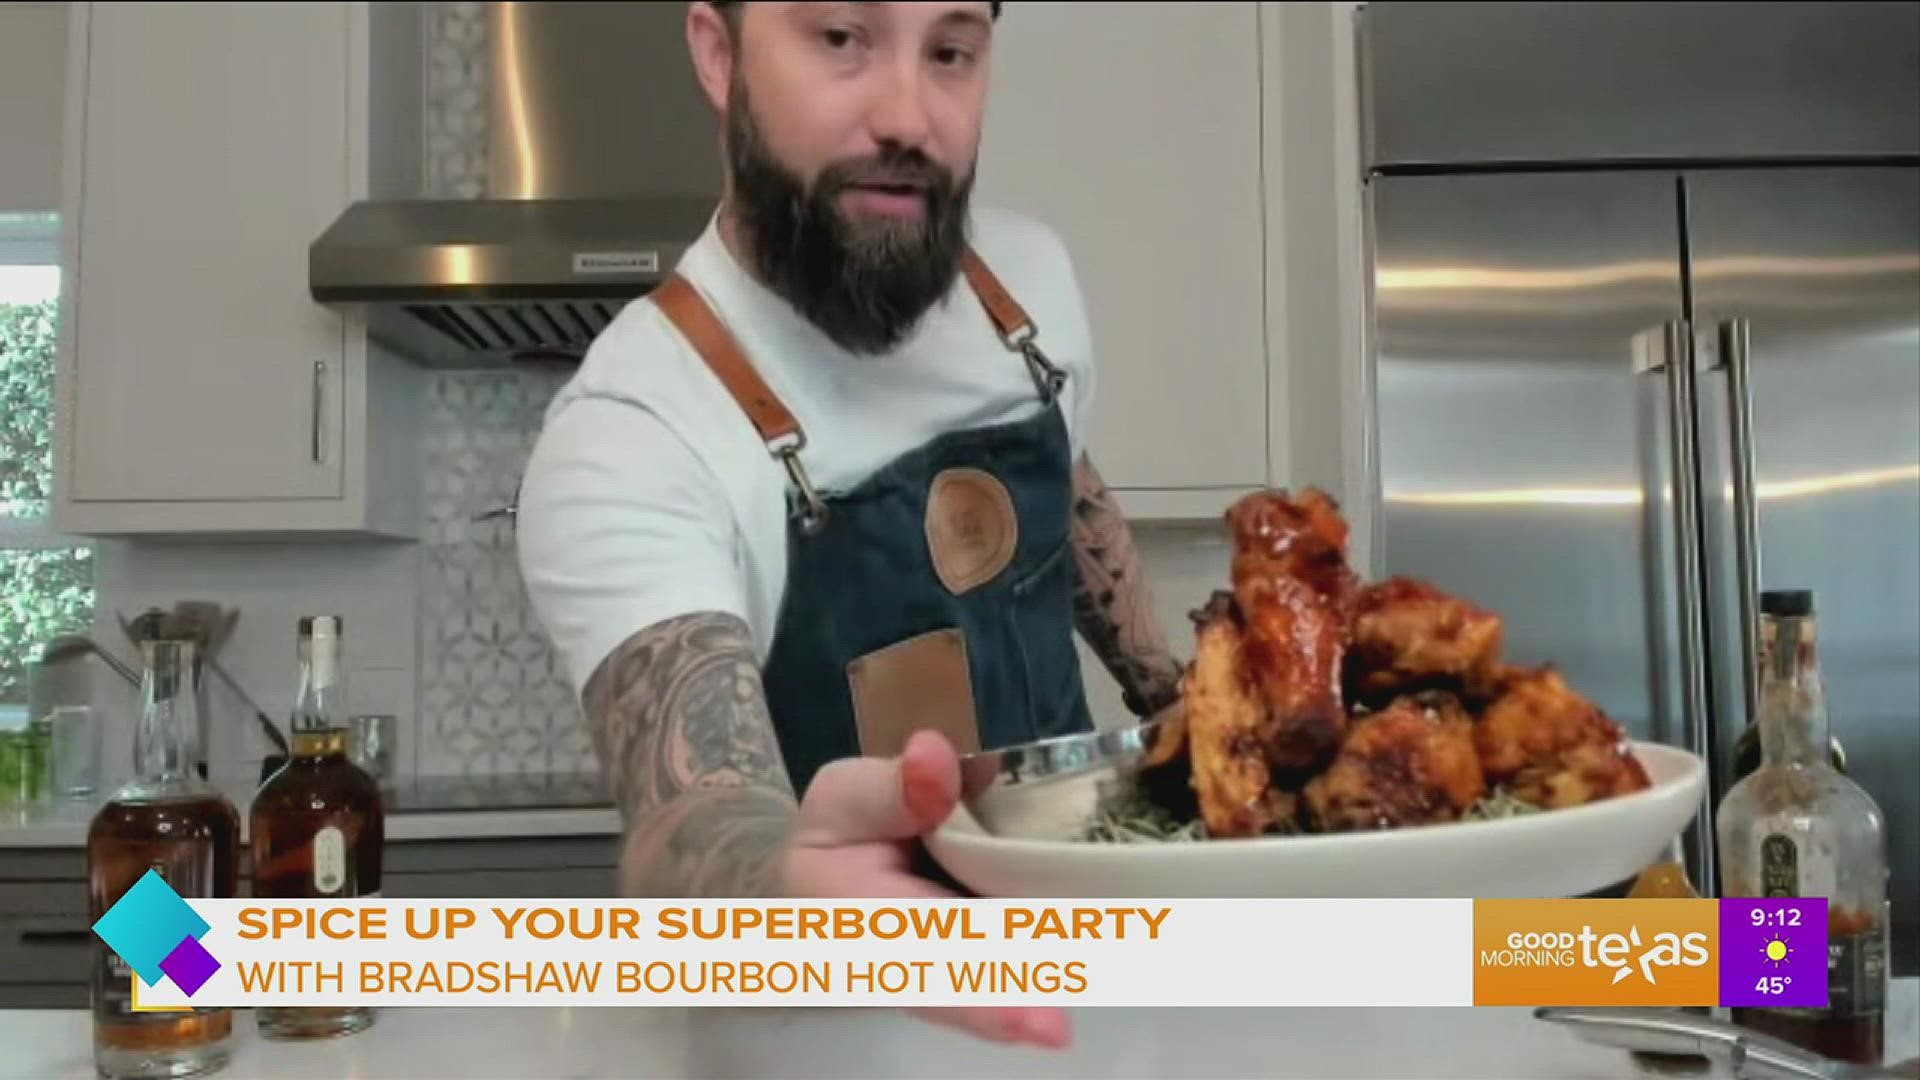 How about heading to the kitchen and spicing up your party with a super bowl special? Chef Noah Hester shares his Bradshaw Bourbon Hot Wings recipe!